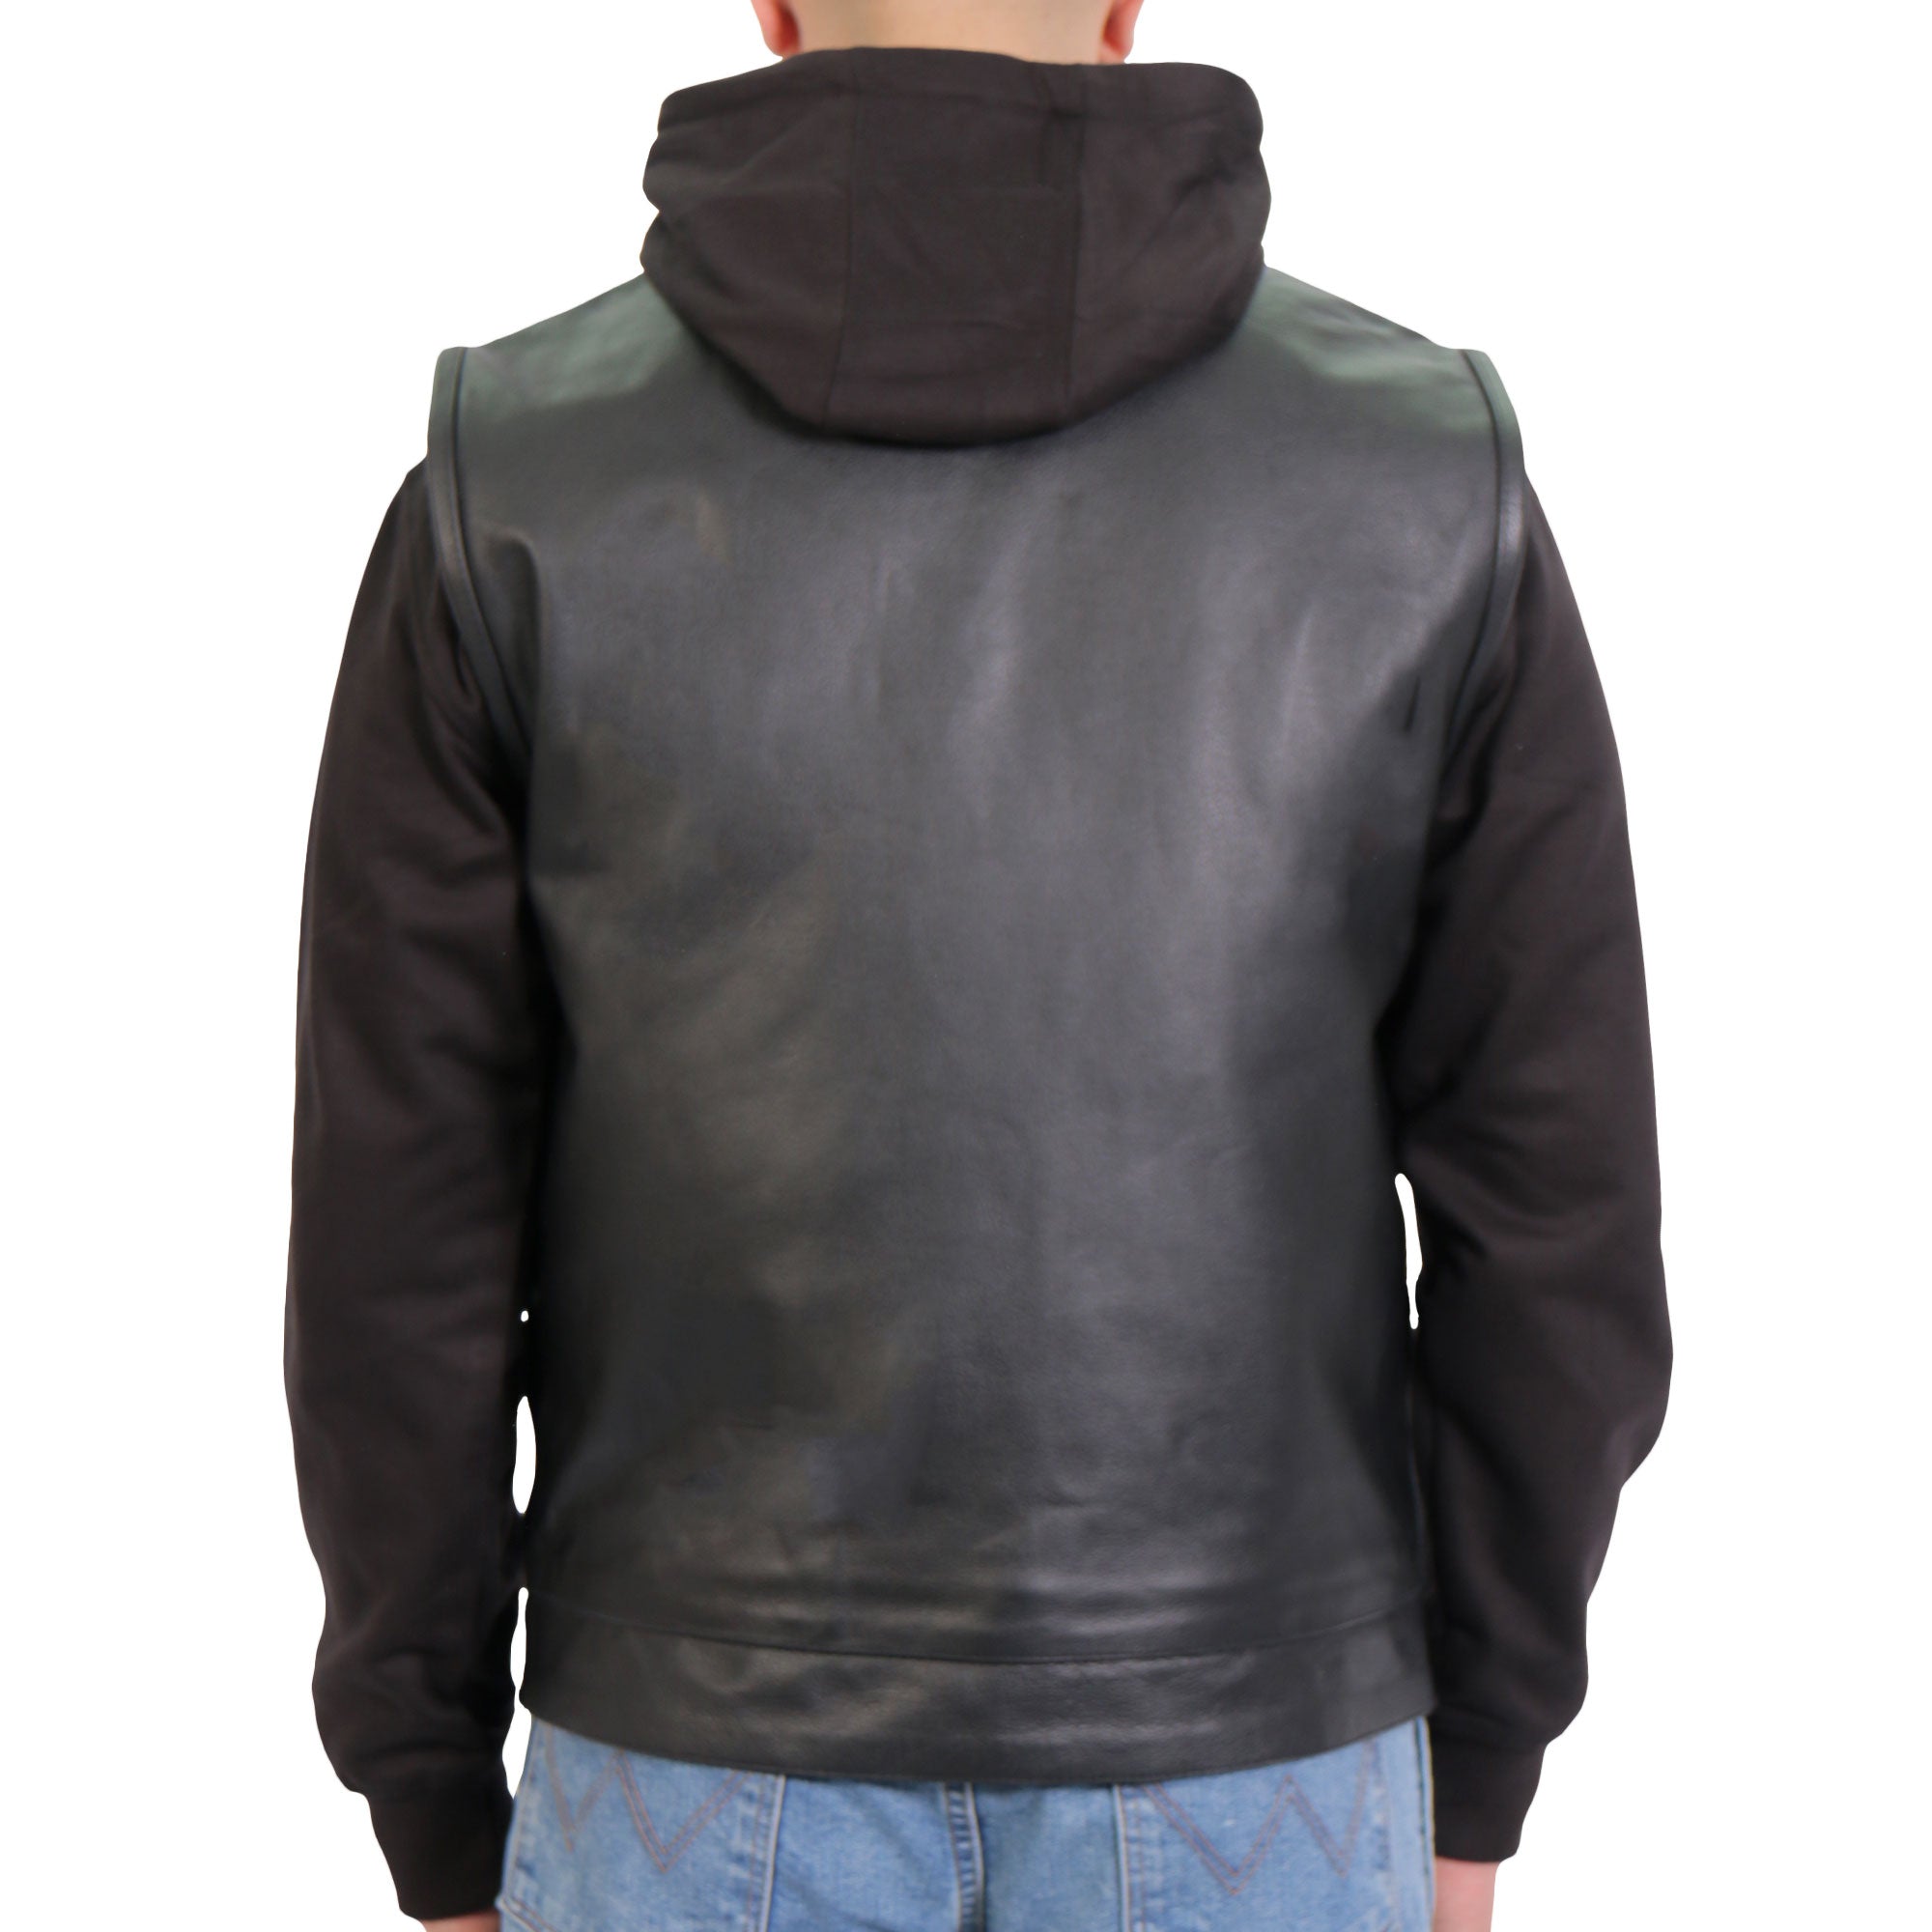 Hot Leathers VSM1202 Men's Black '2-in-1' Conceal and Carry Leather Vest with Hoodie